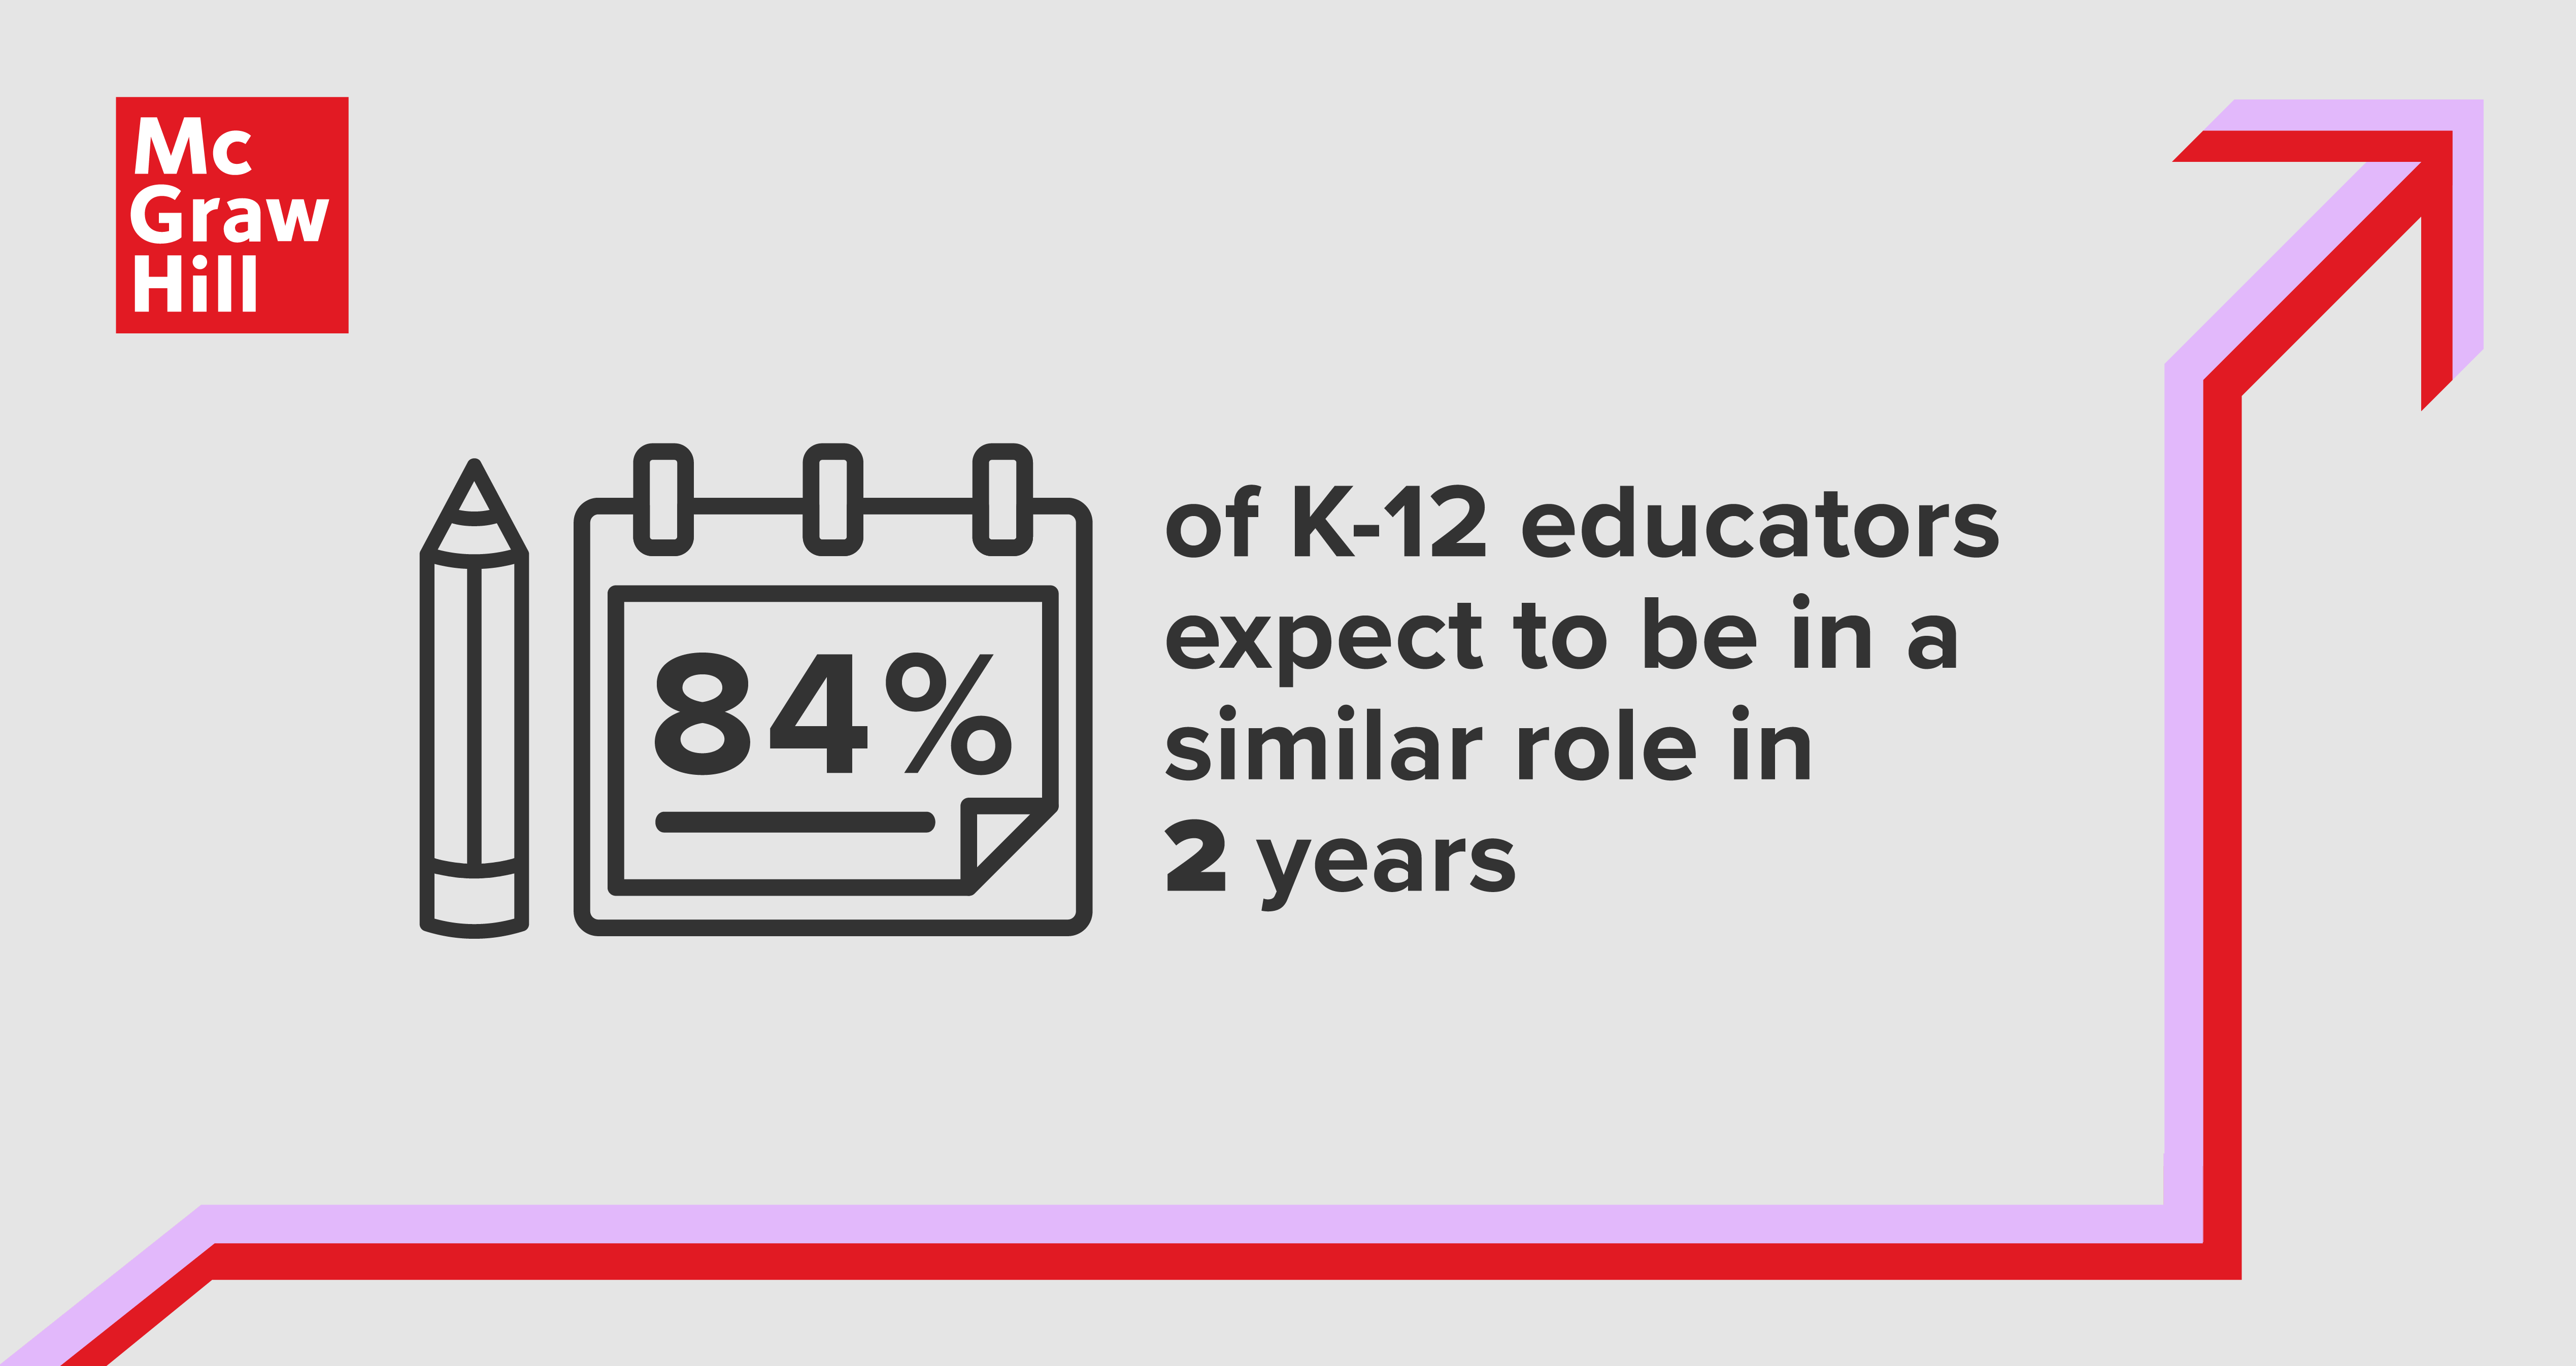 84% of K-12 educators expect to be in a simlar role in 2 years